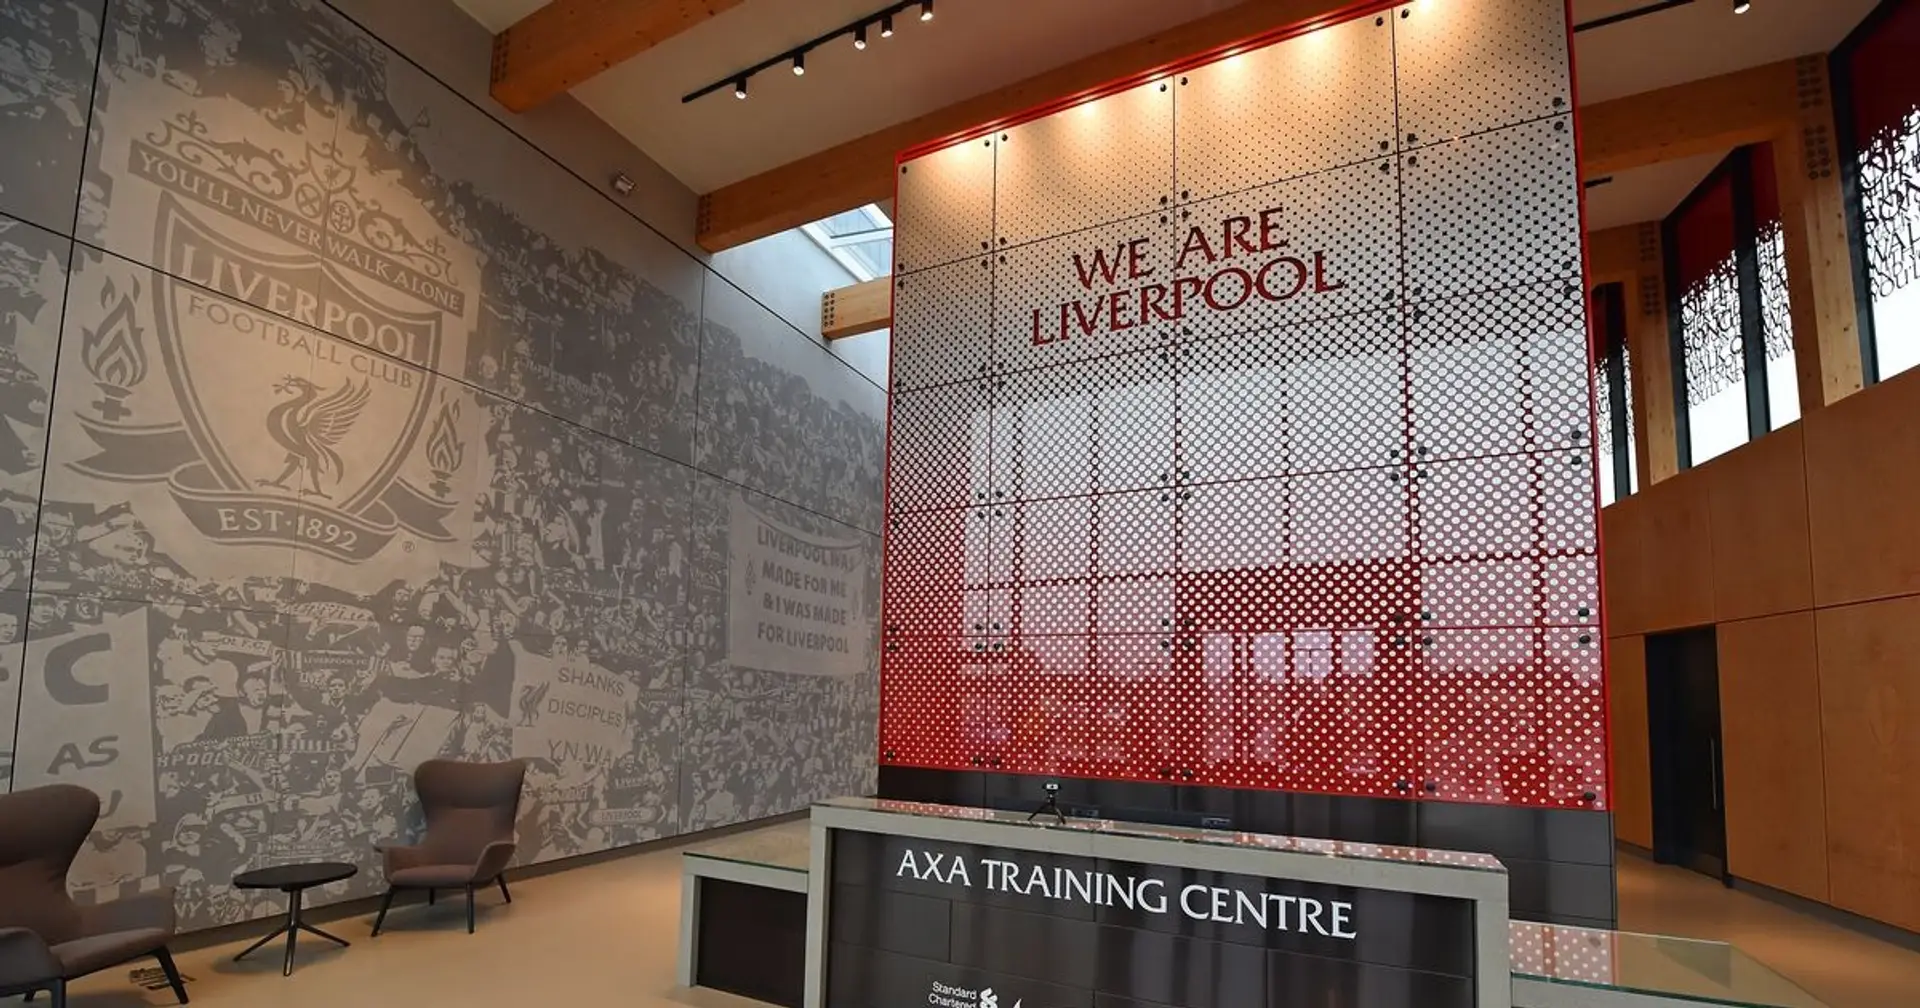 Open-floor gyms and inspiration from Salzburg: 5 behind-the-scenes facts about Liverpool's new training ground